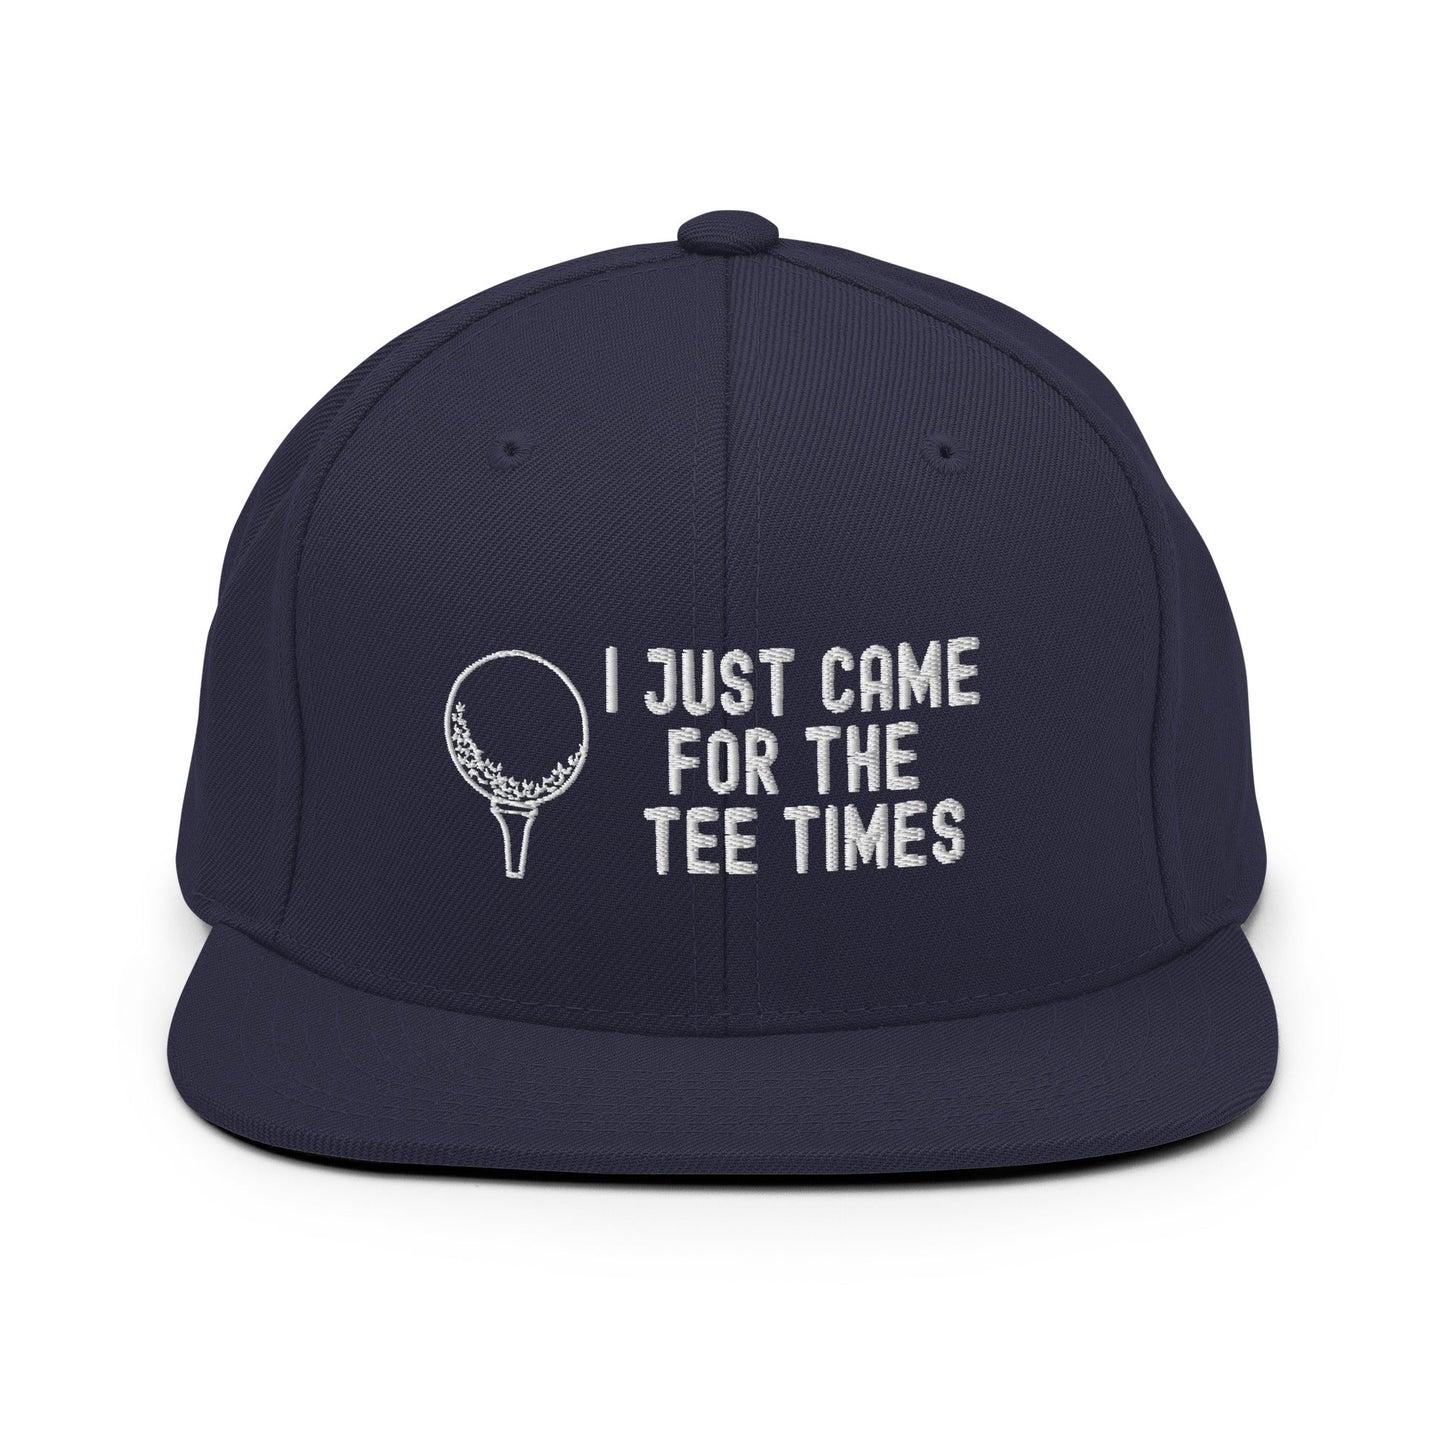 Funny Golfer Gifts  Snapback Hat Navy I Just Came For The Tee Times Snapback Hat